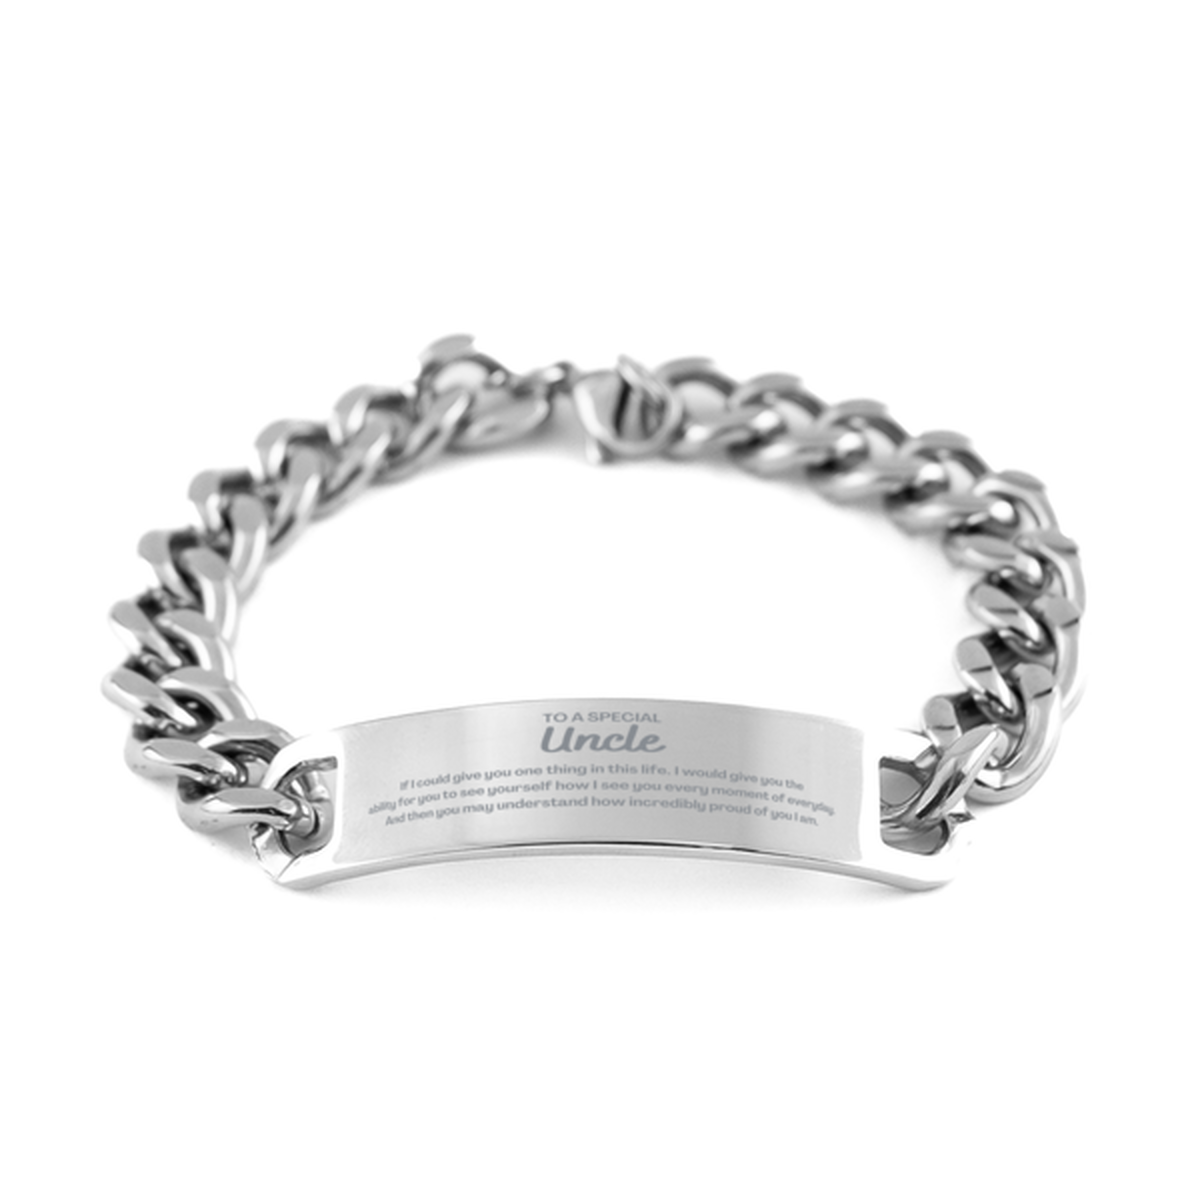 To My Uncle Cuban Chain Stainless Steel Bracelet, Gifts For Uncle Engraved, Inspirational Gifts for Christmas Birthday, Epic Gifts for Uncle To A Special Uncle how incredibly proud of you I am